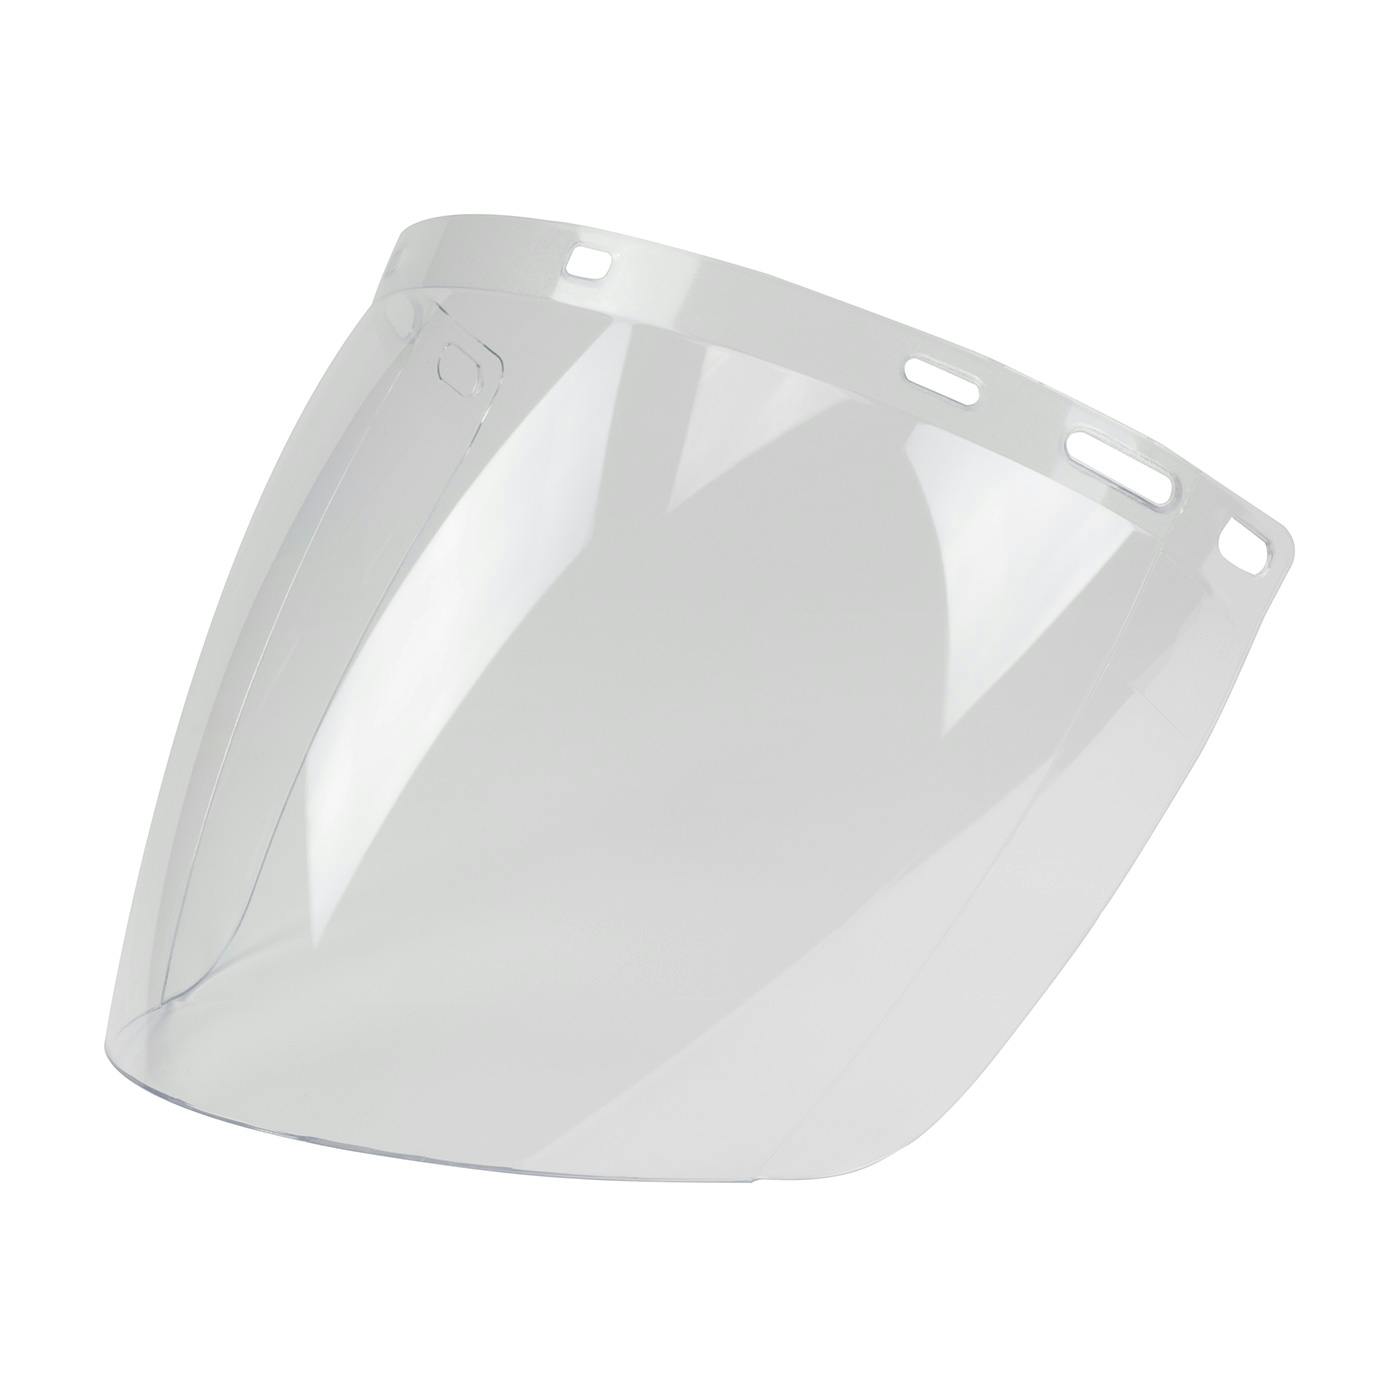 Uncoated Aspherical Polycarbonate Safety Visor - Clear, Clear (251-01-7401) - OS